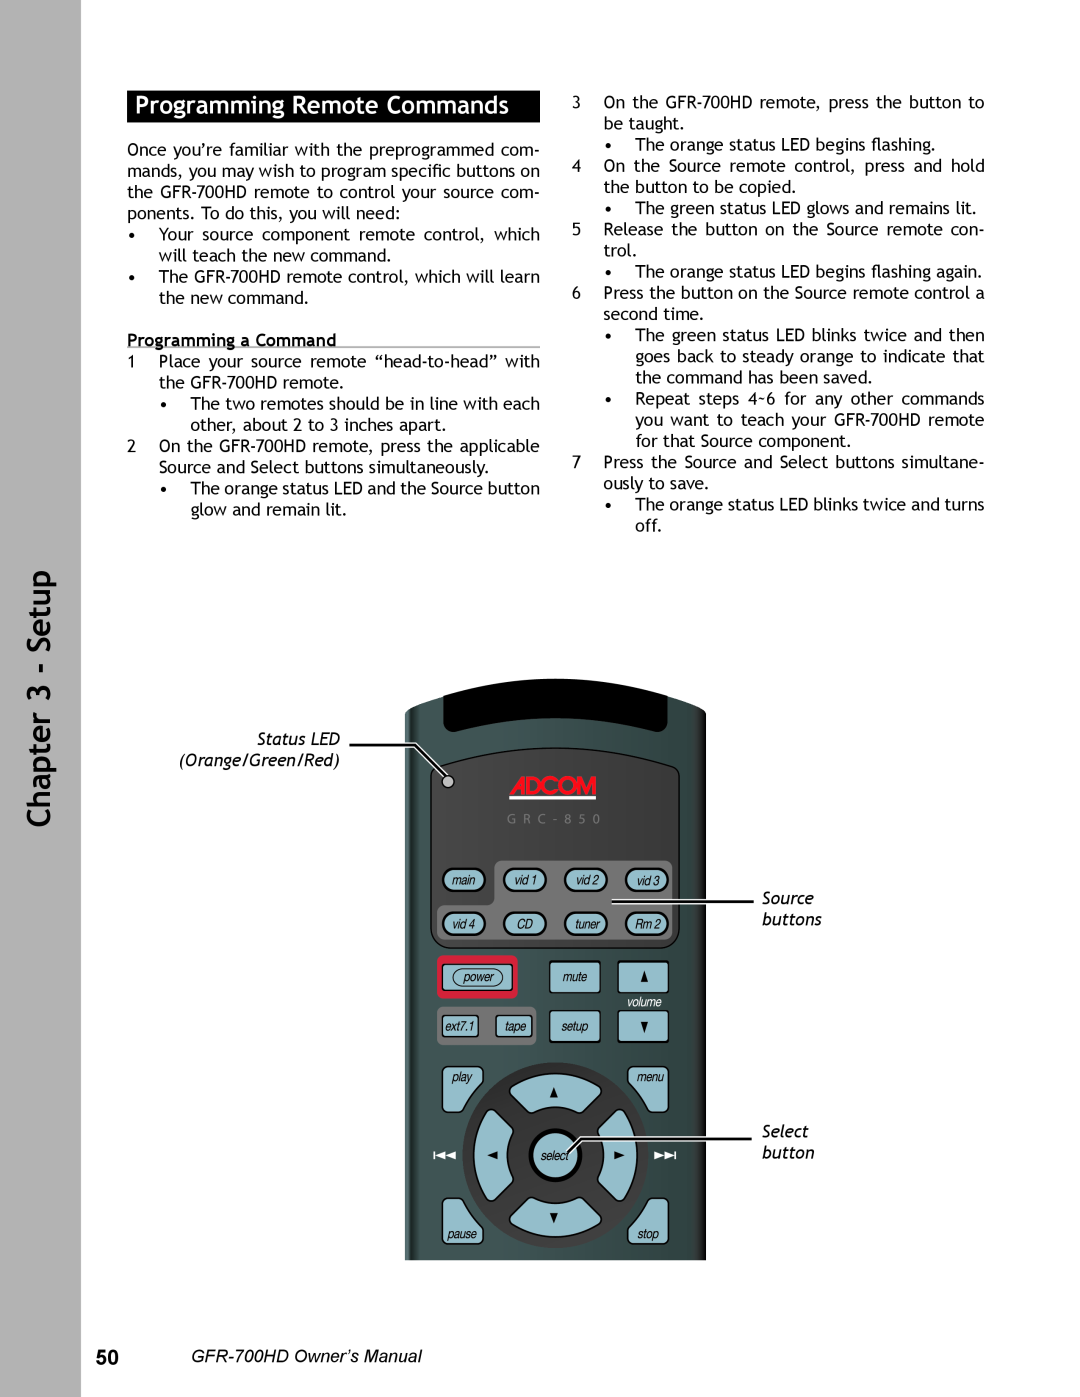 Adcom GFR-700HD Programming Remote Commands, Programming a Command, Status LED Orange/Green/Red Source buttons, Setup 